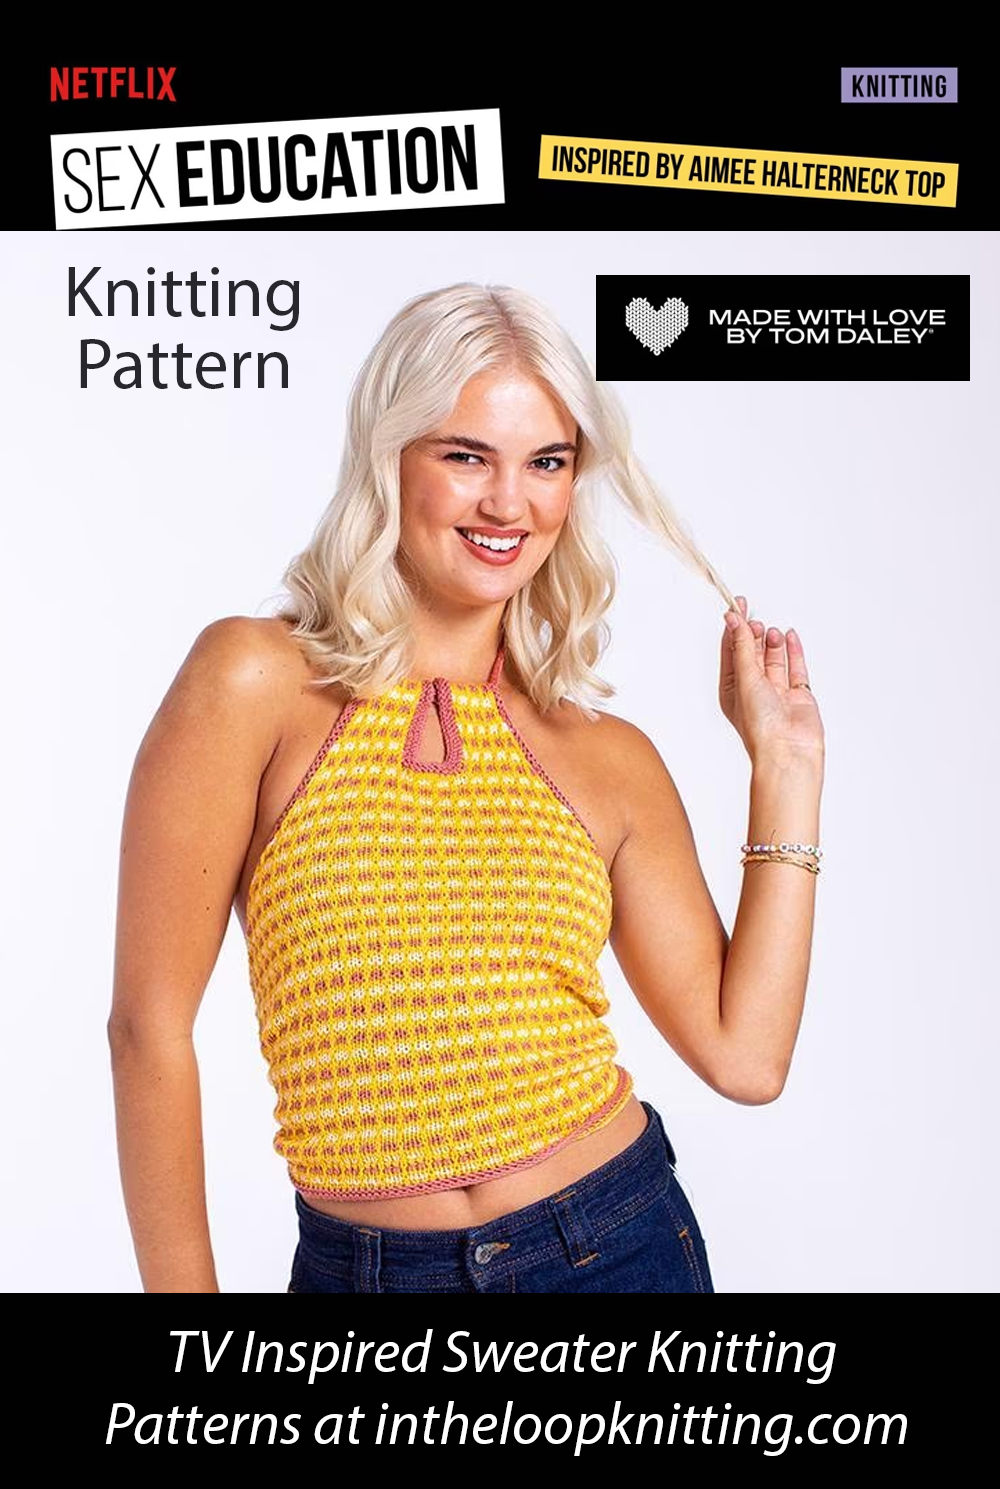  Aimee Halterneck Top Knitting Pattern Inspired by Sex Education